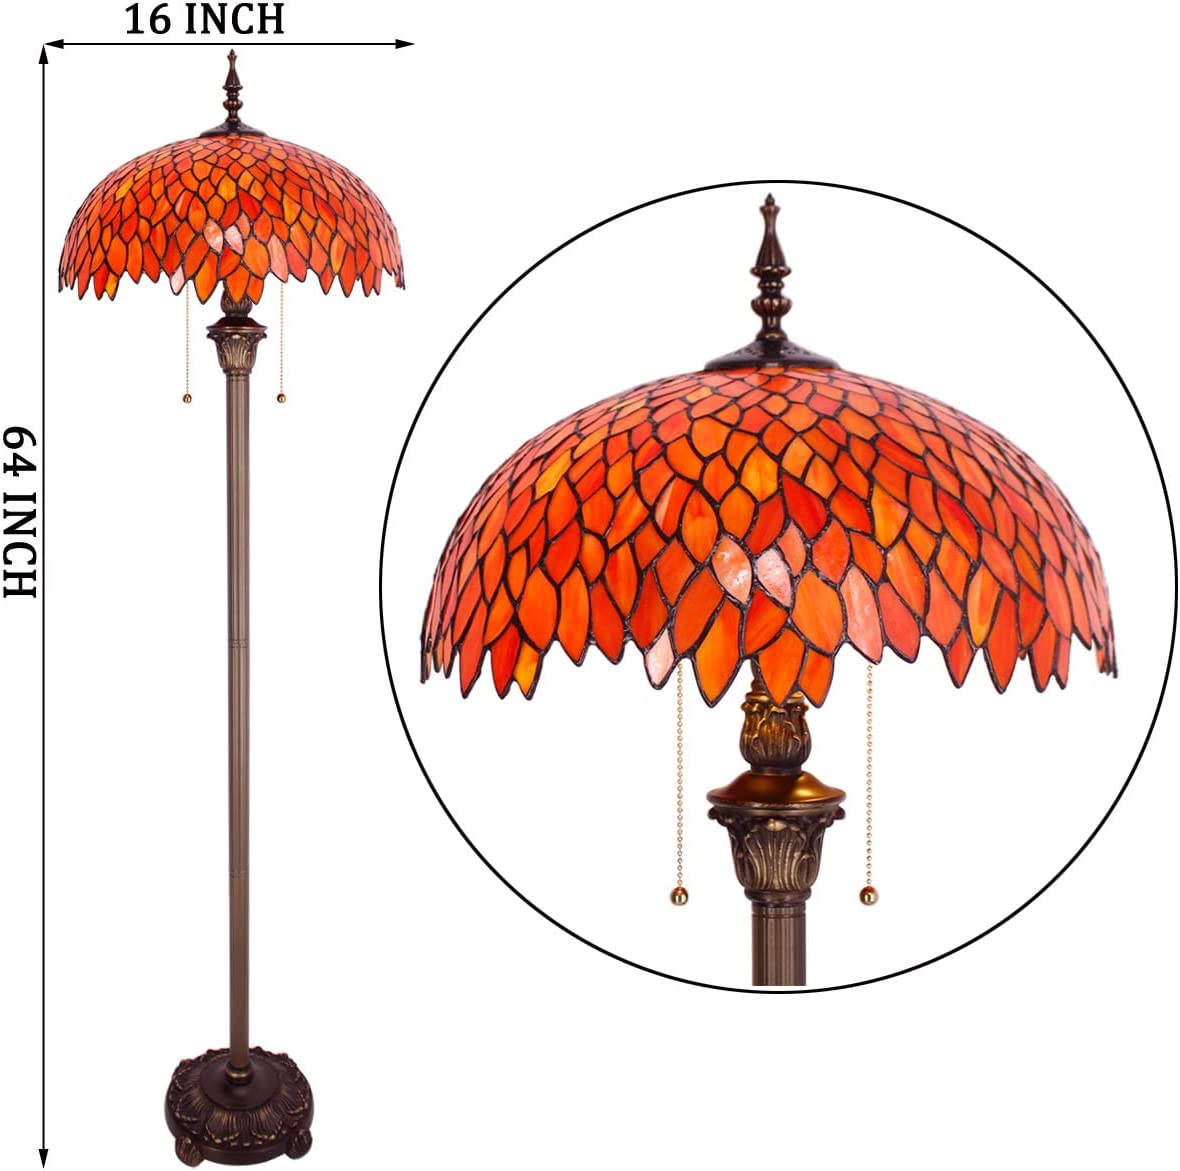 BBNBDMZ  Floor Lamp Red Wisteria Stained Glass Standing Reading Light 16X16X64 Inches Antique Pole Corner Lamp Decor Bedroom Living Room  Office S523R Series